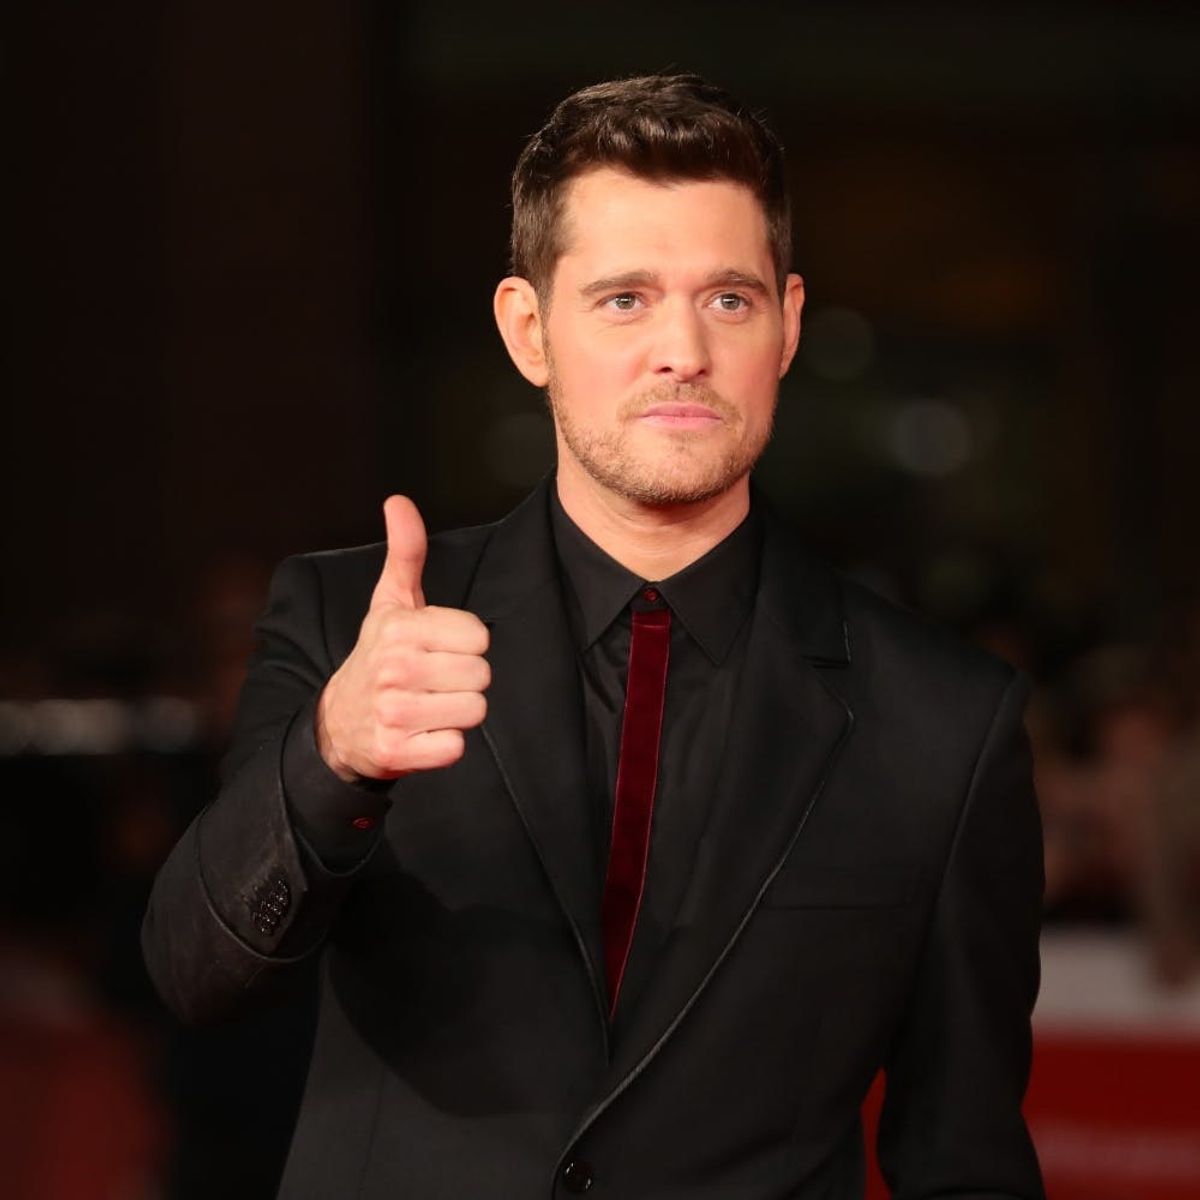 Michael Bublé Made His First Public Appearance Since His Son’s Cancer Diagnosis to Thank Fans for Their Support